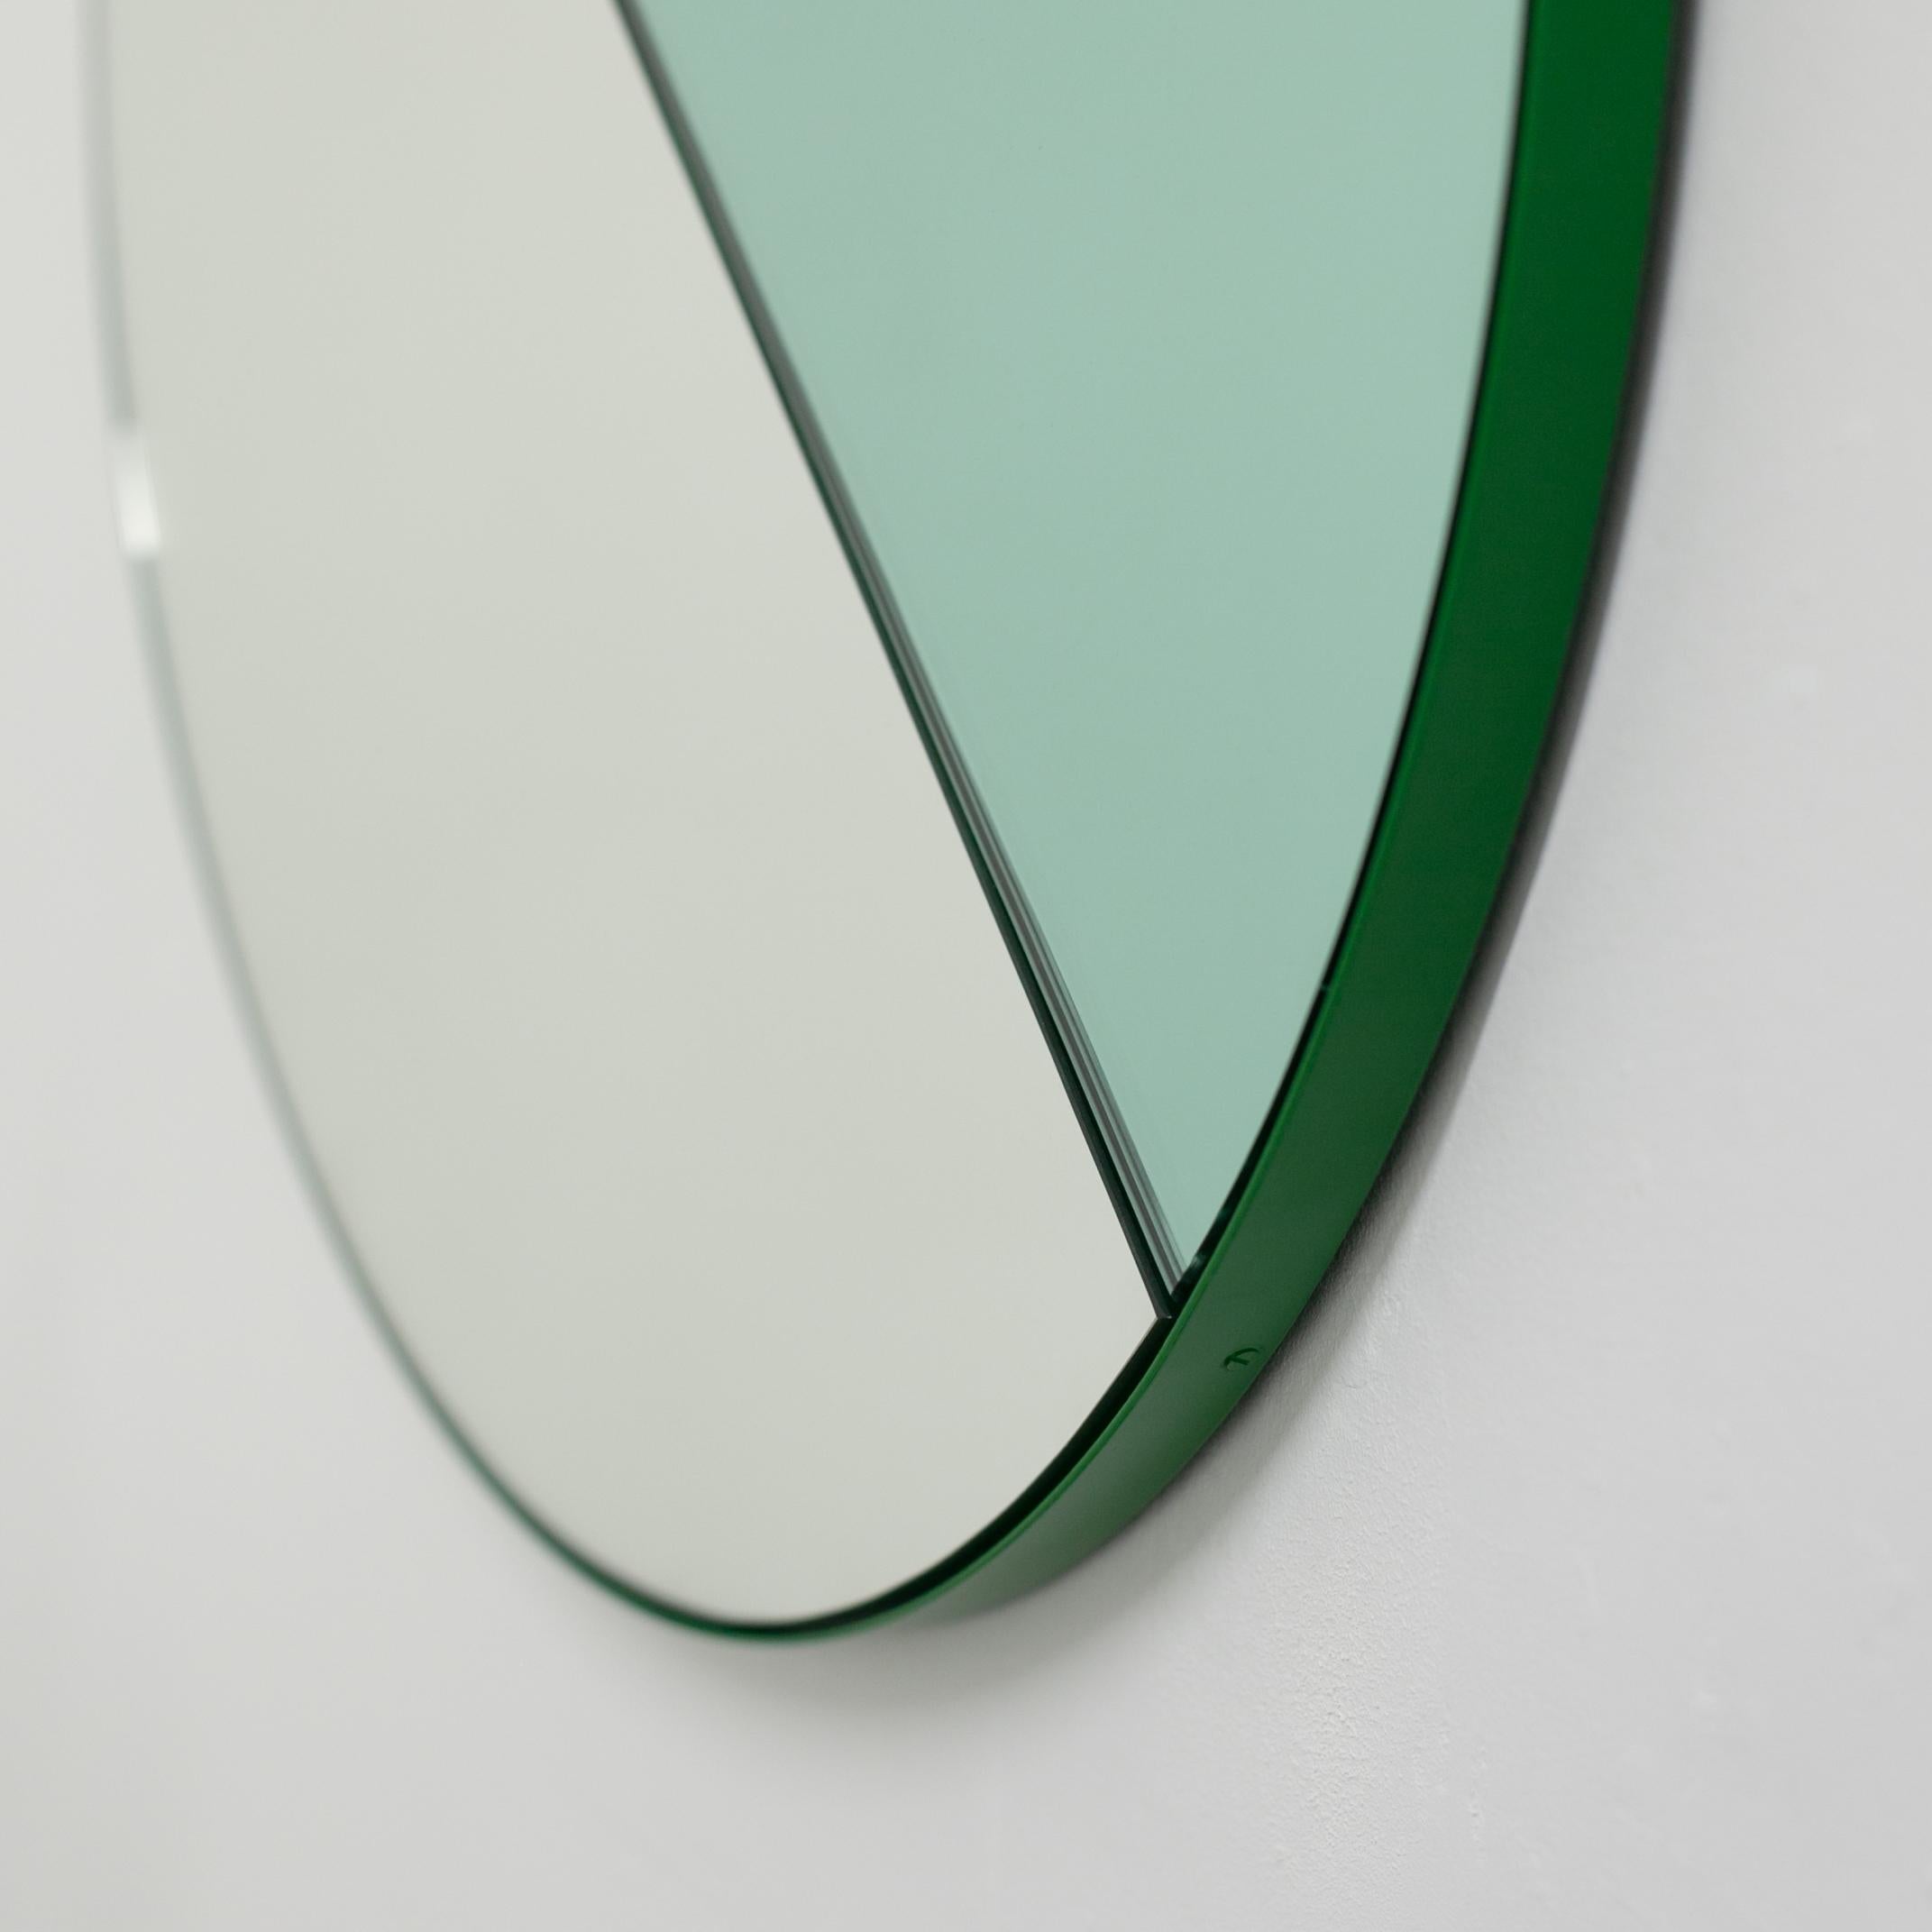 Orbis Dualis Mixed 'Green + Silver' Round Mirror with Green Frame, Small 6